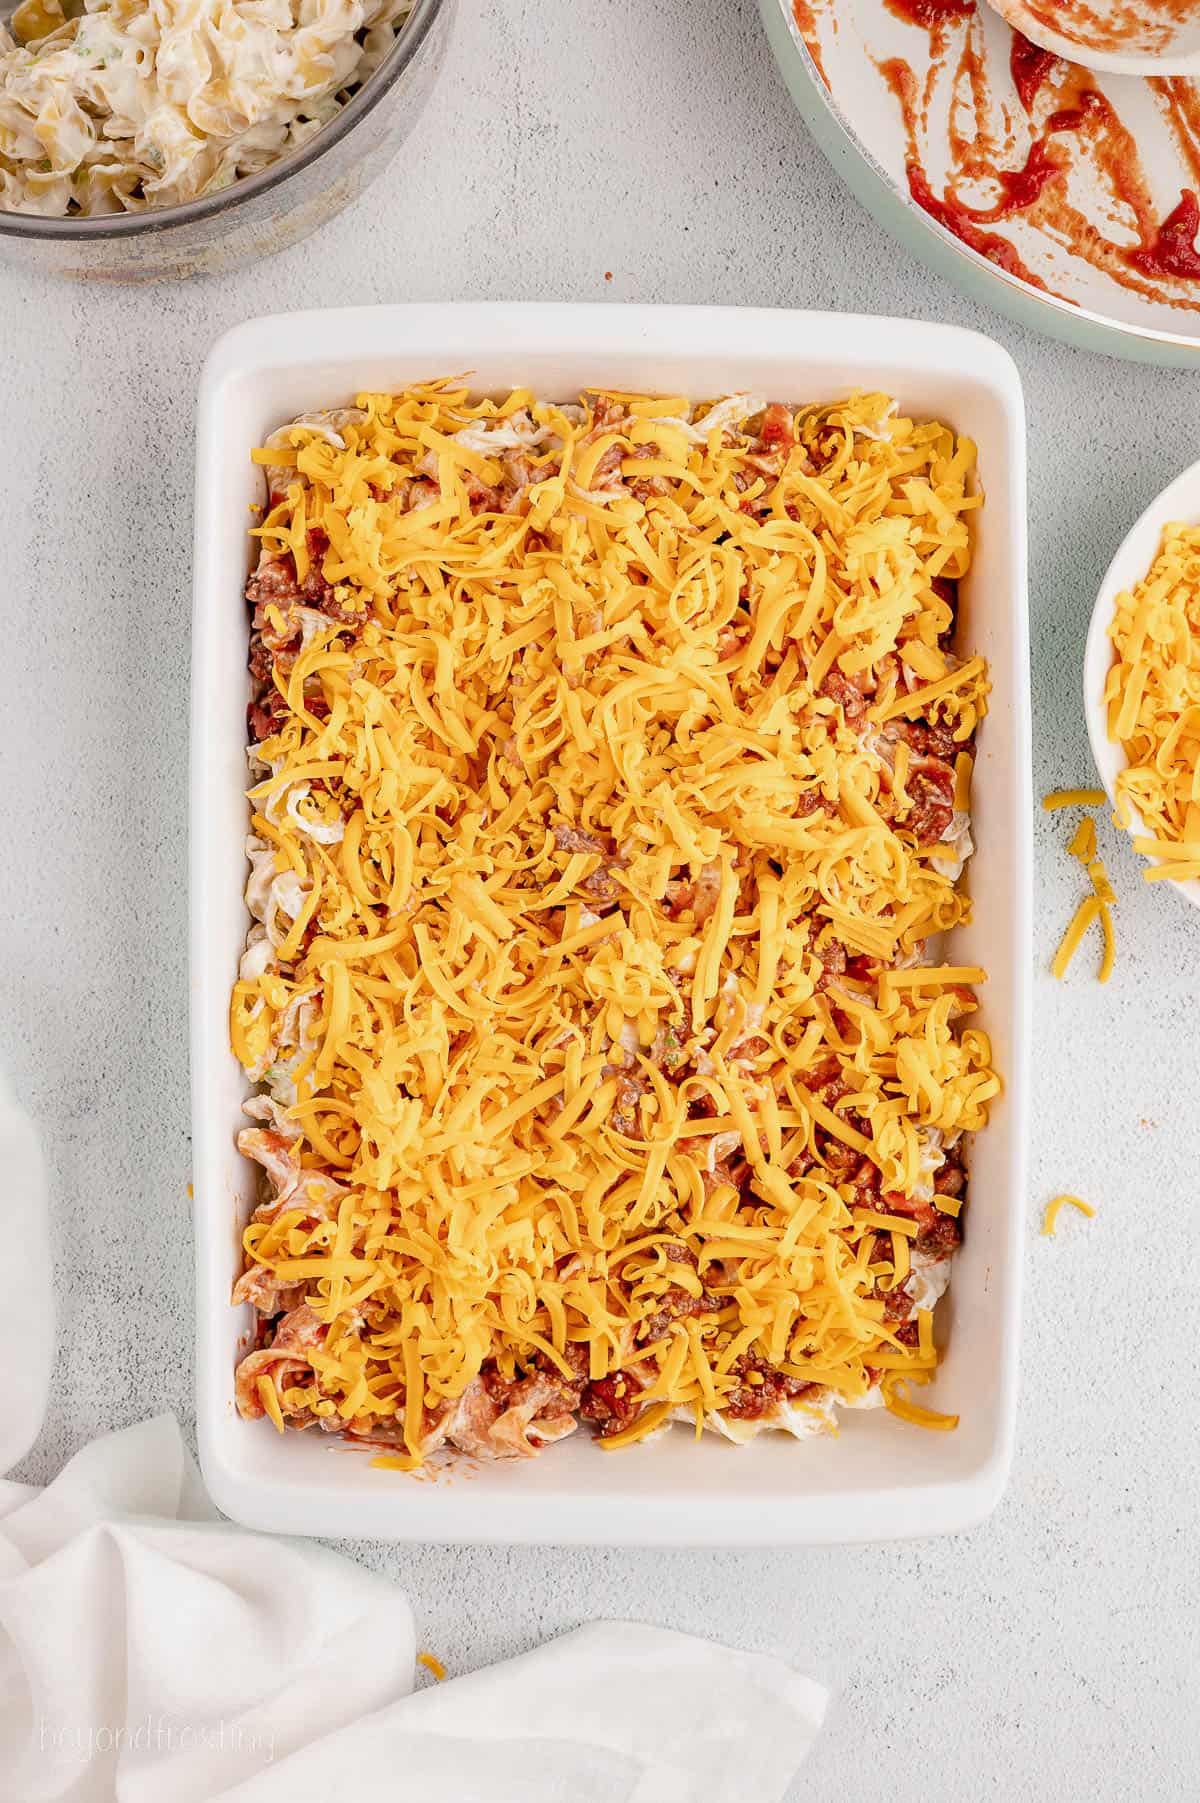 Cheddar cheese on top of noodles in a casserole dish